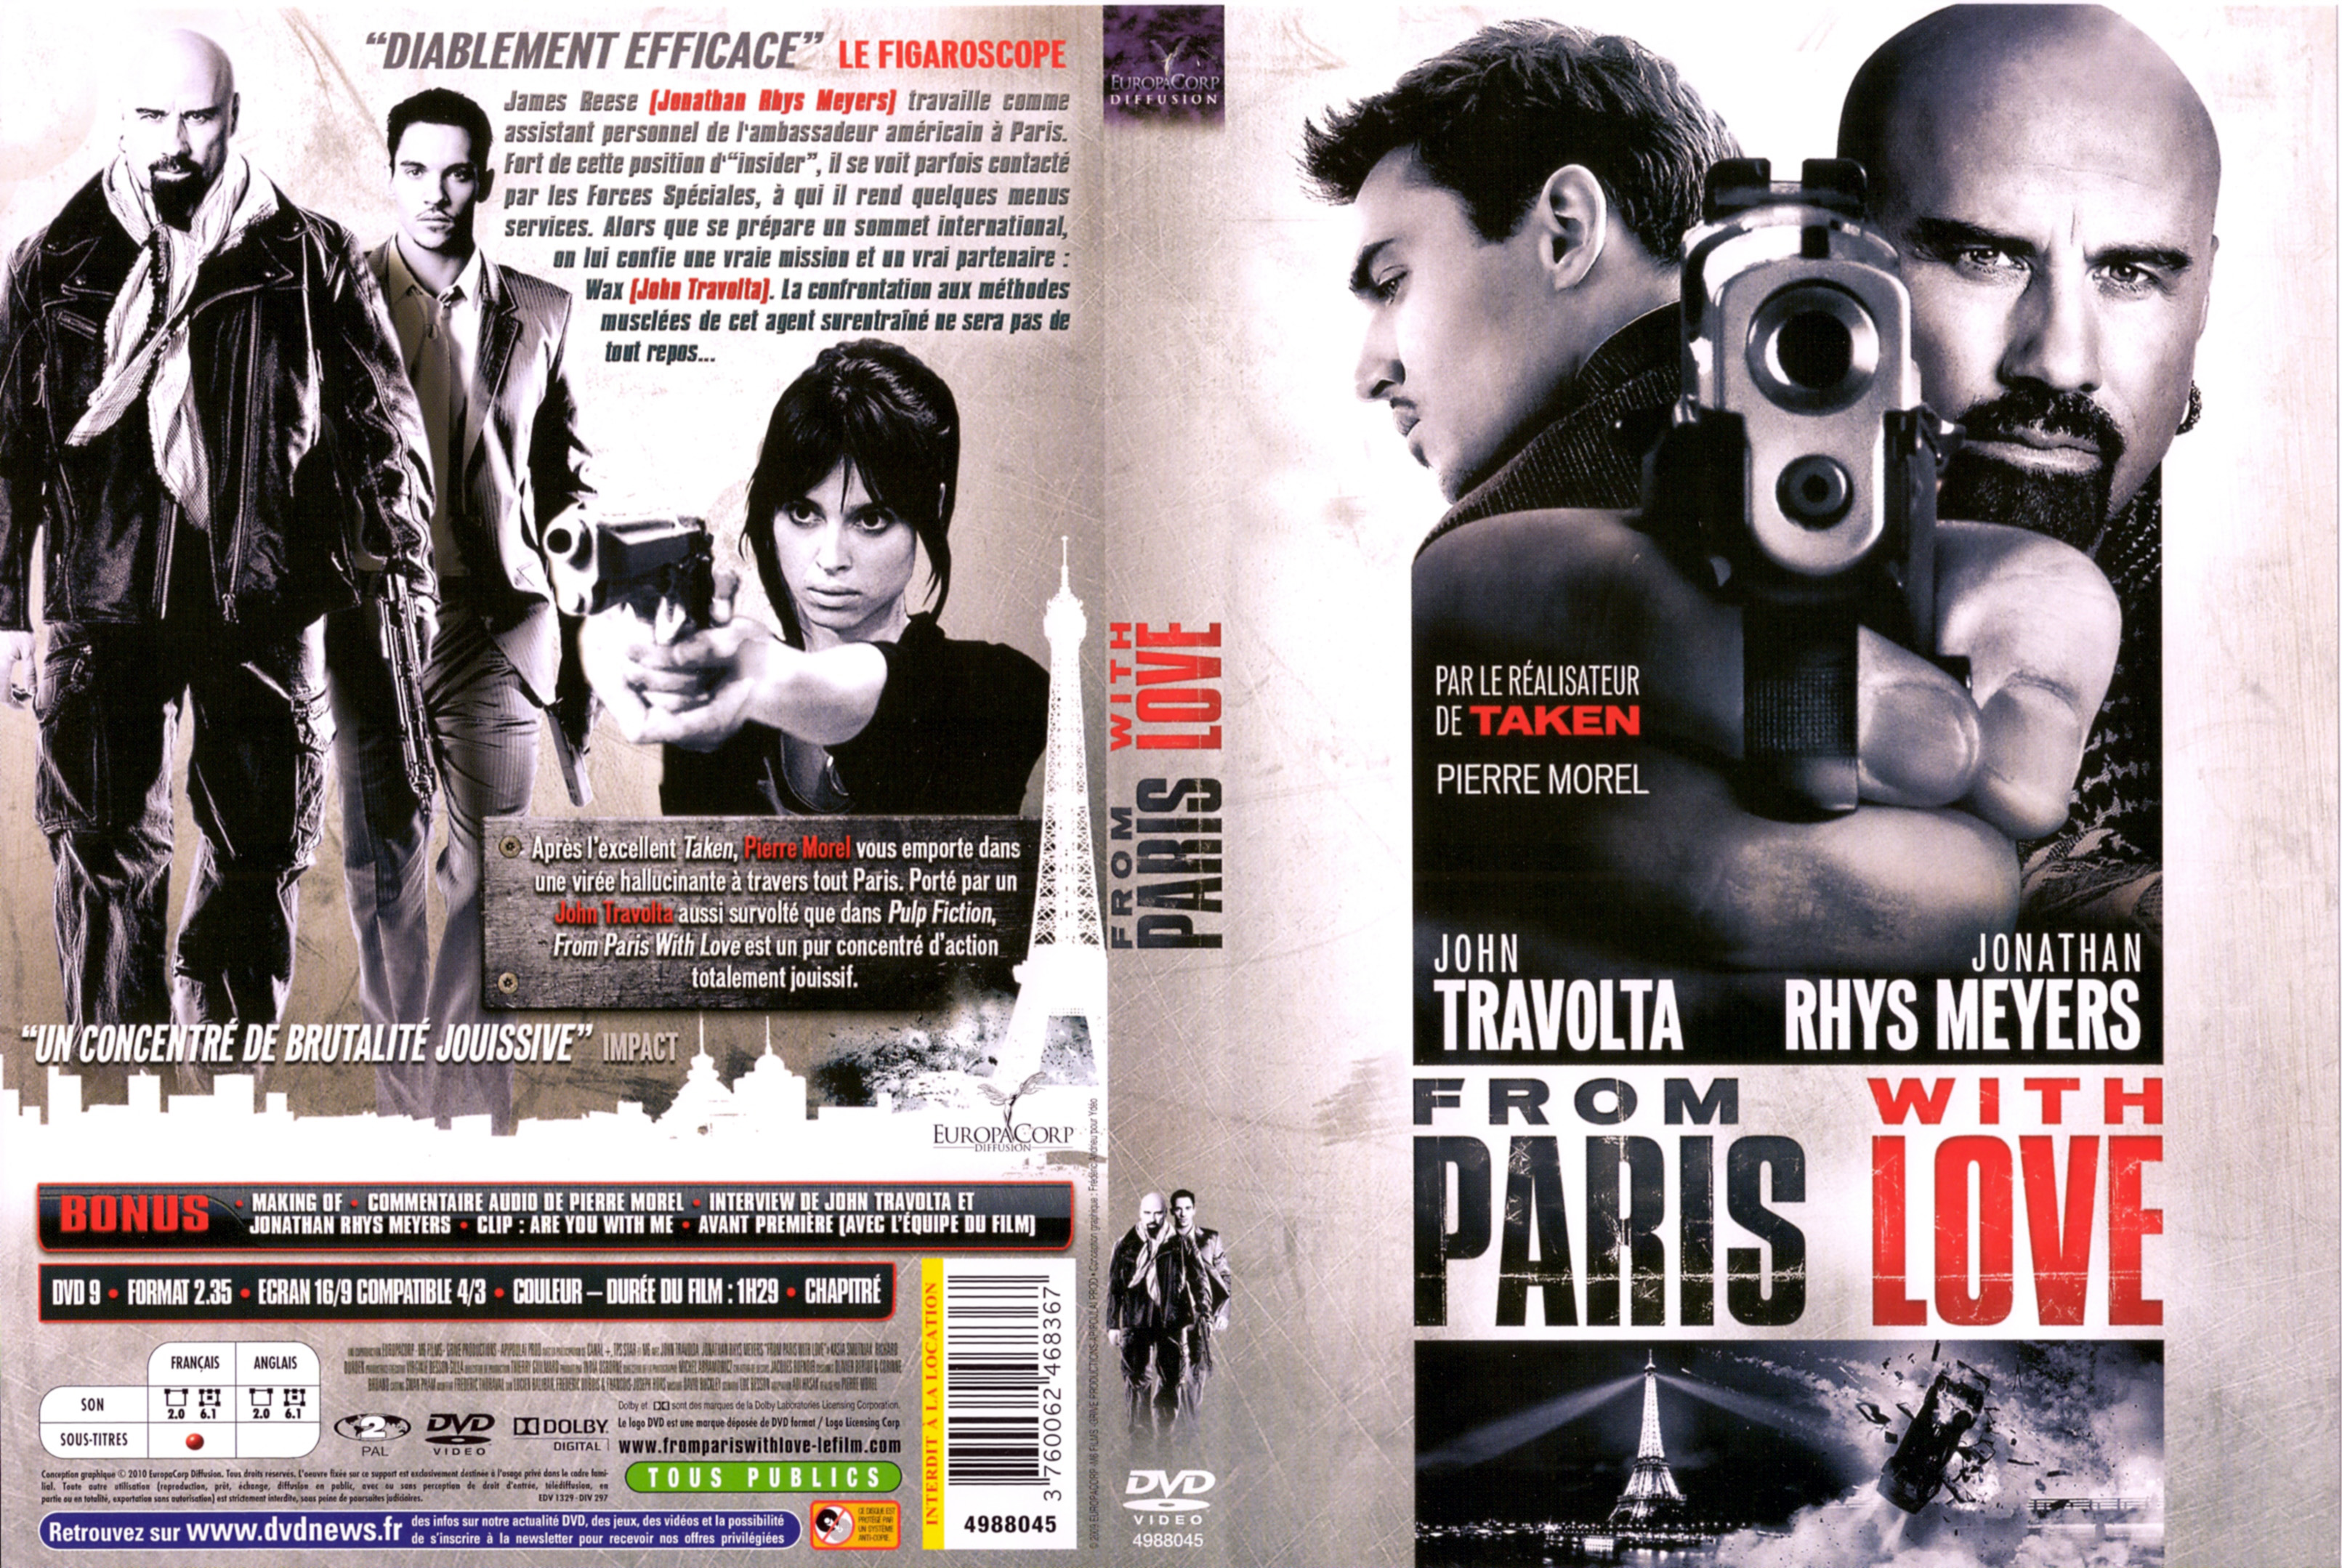 Jaquette DVD From Paris with love